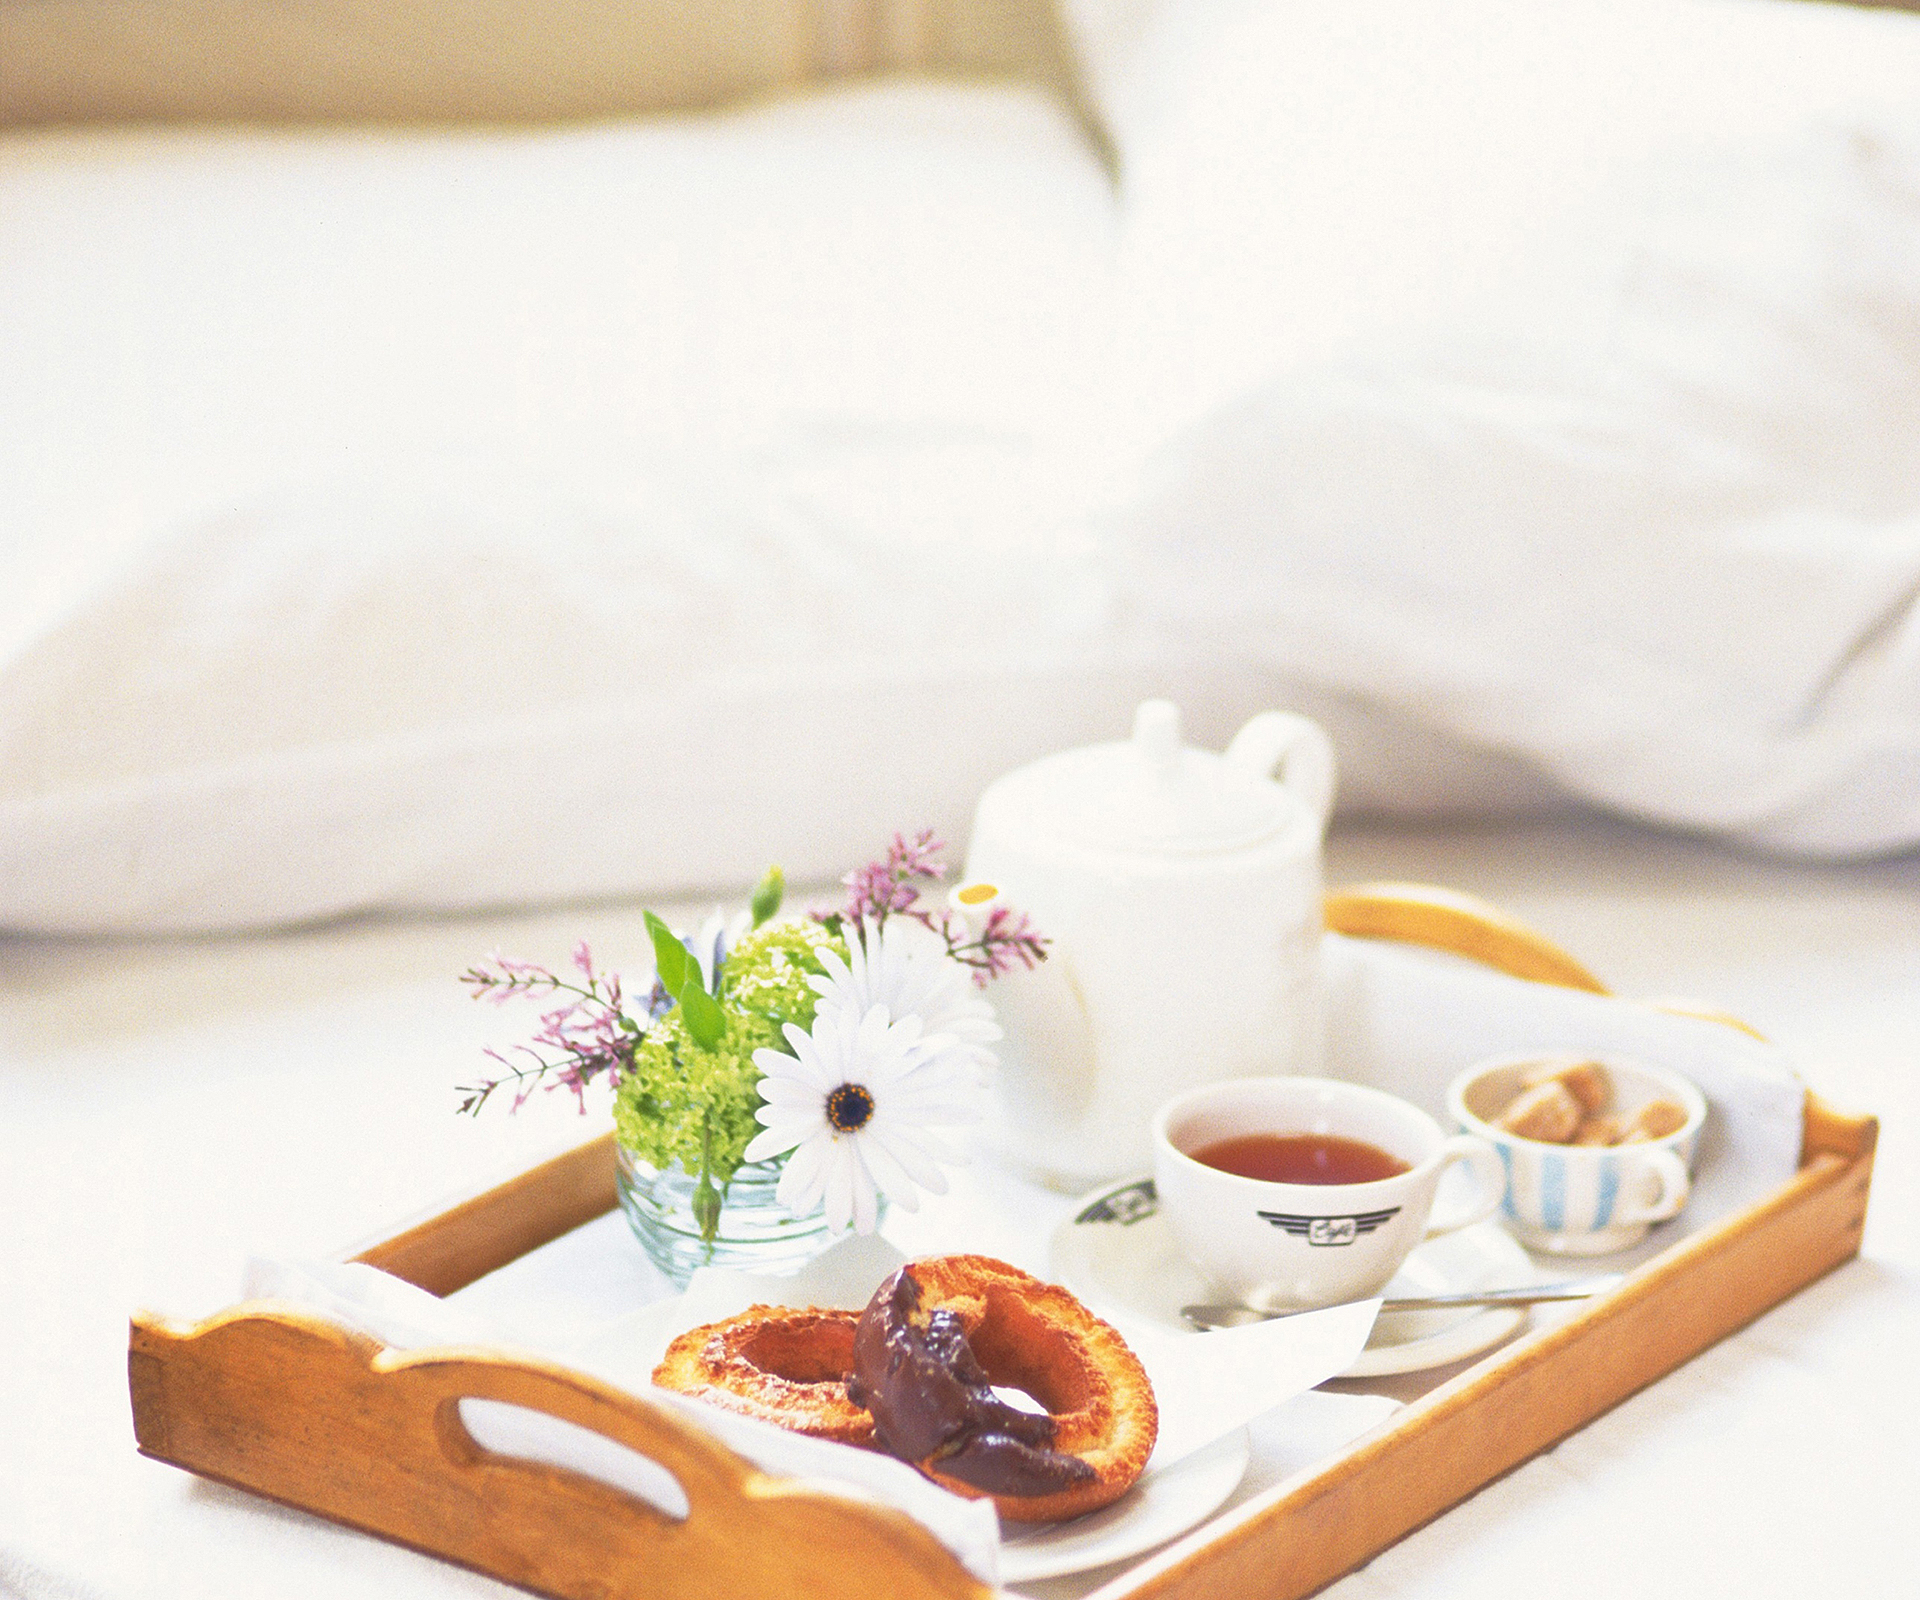 A handy how-to guide to breakfast in bed